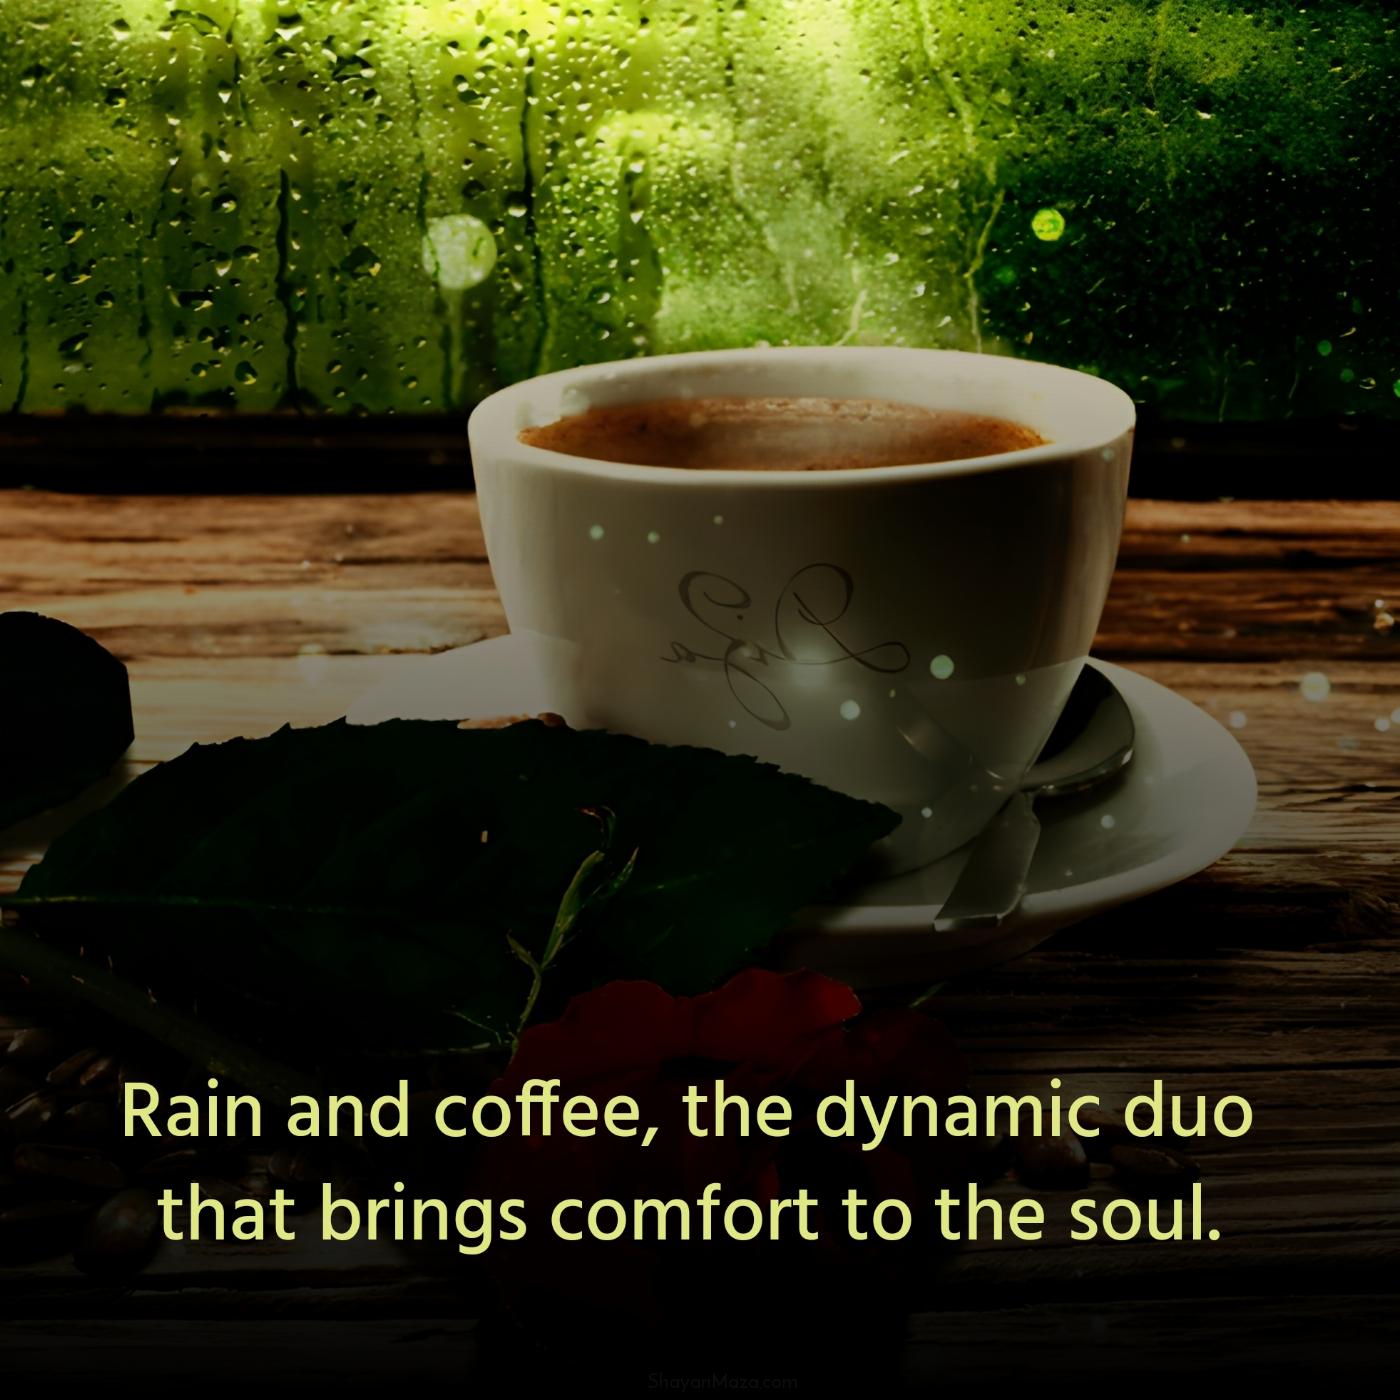 Rain and coffee the dynamic duo that brings comfort to the soul